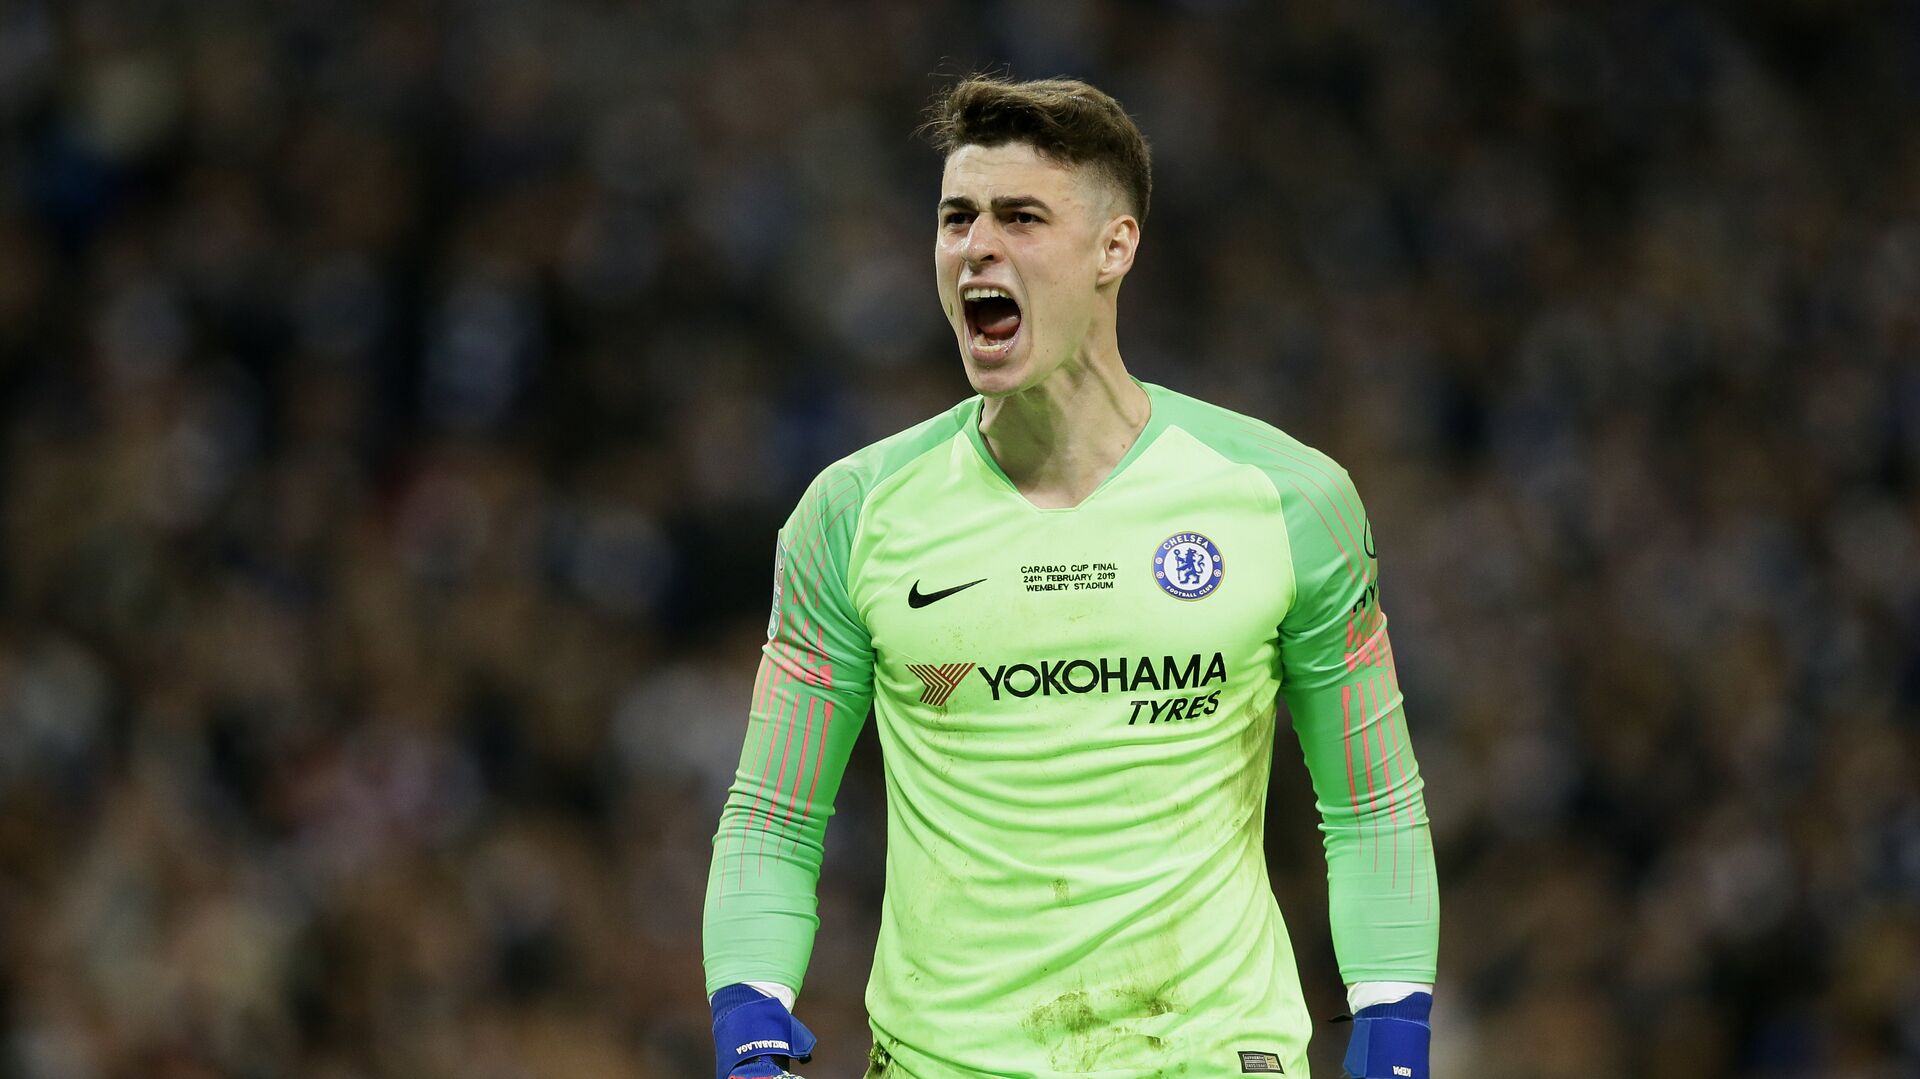 Chelsea's goalkeeper Kepa Arrizabalaga screams at the bench after refusing to be substituted at Wembley on 24 February 2019 - اسپوتنیک افغانستان  , 1920, 05.03.2022